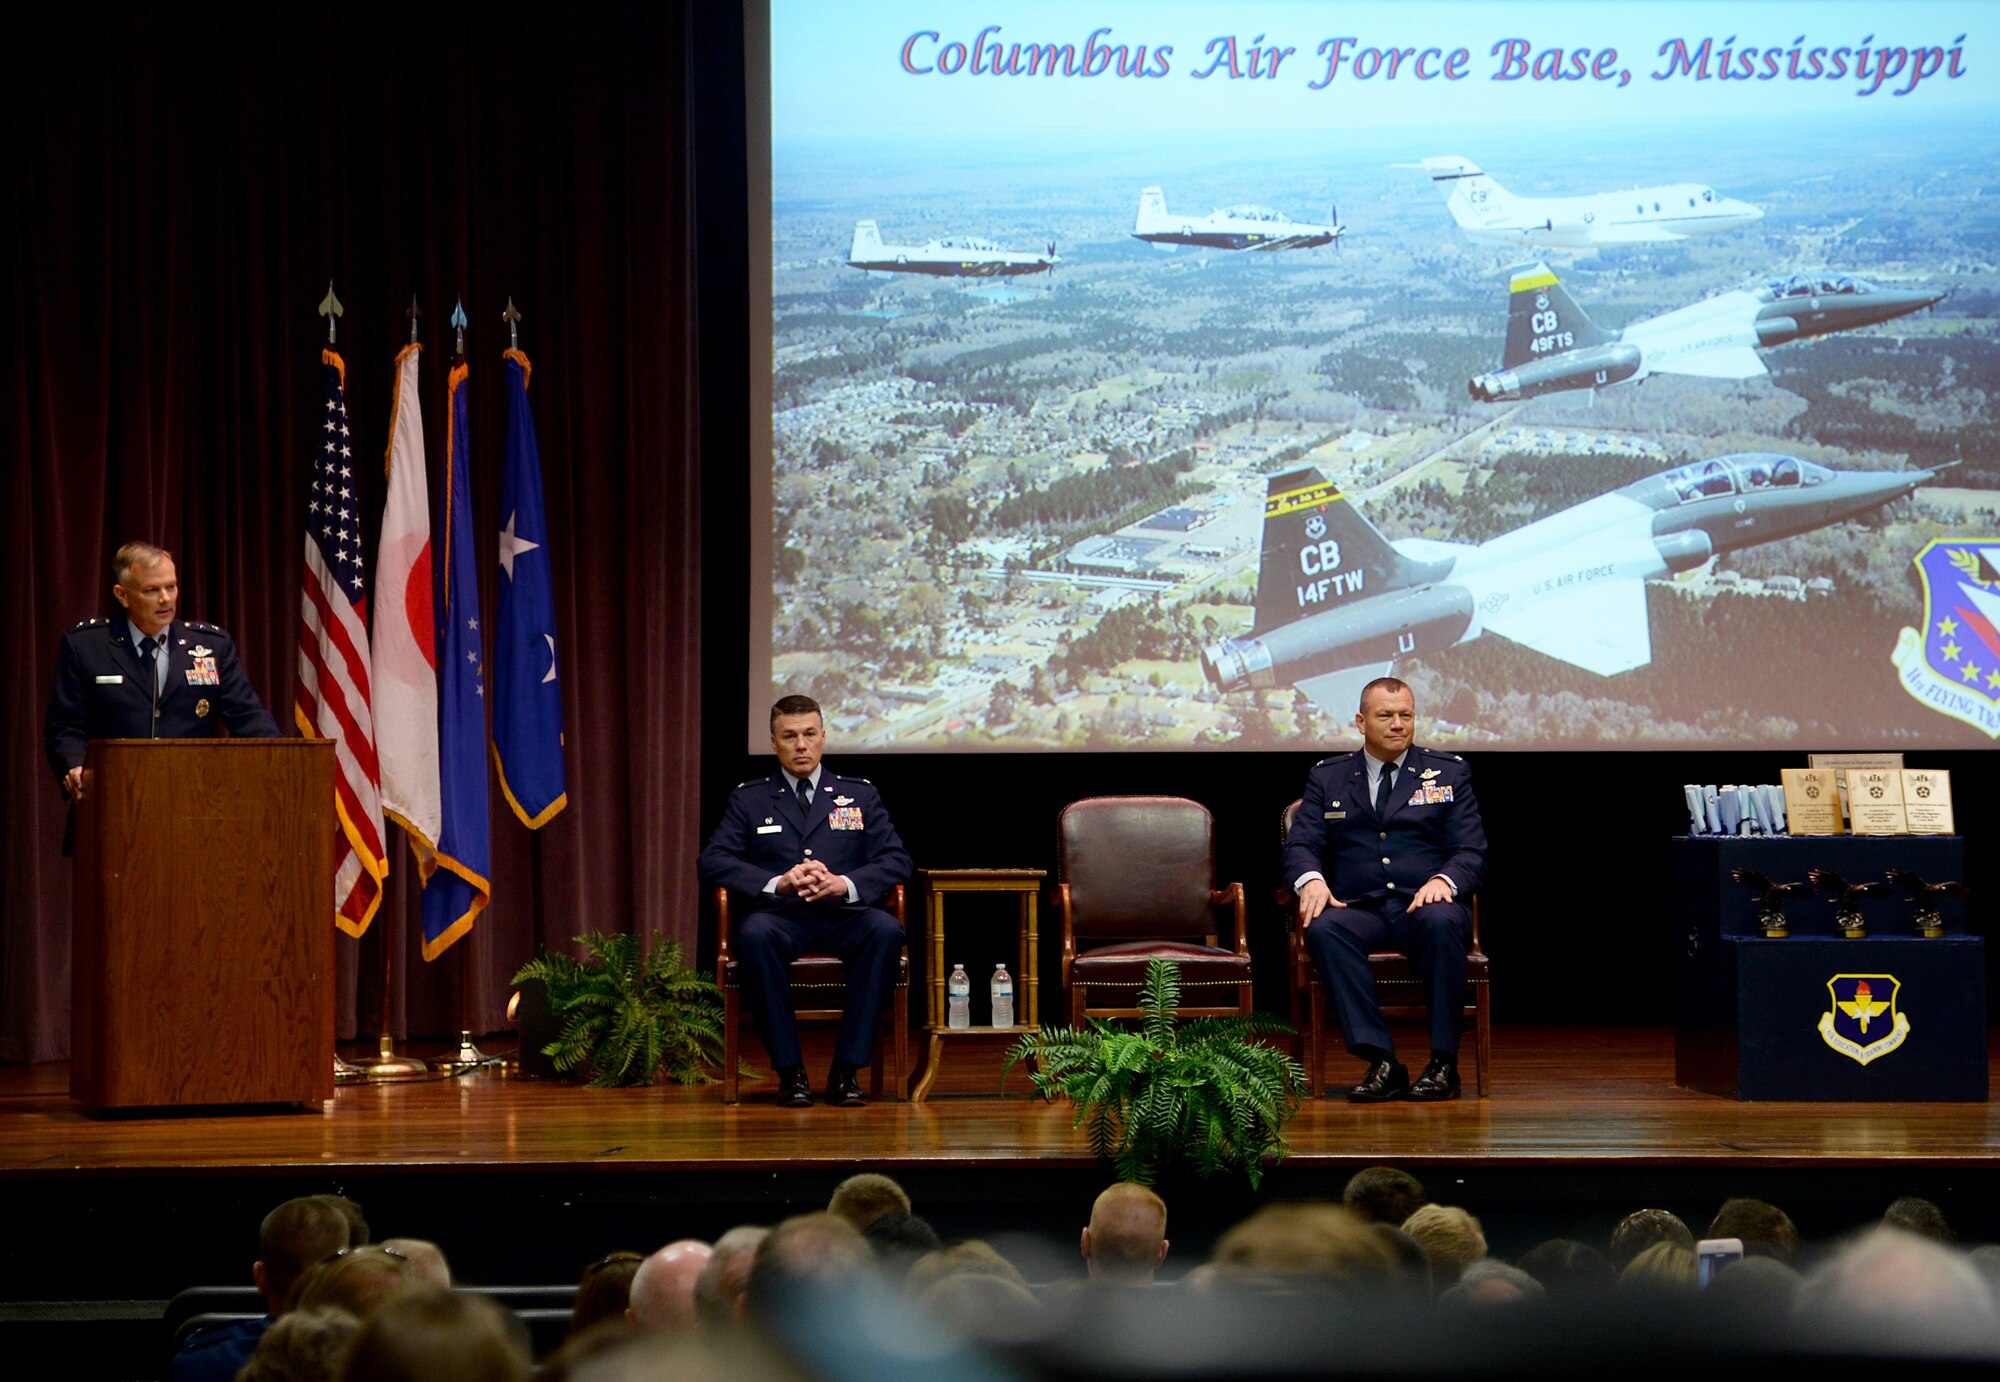 Maj. Gen. Glen VanHerck, Vice Director for Strategic Plans and Policy, Joint Staff at the Pentagon, Washington, D.C., speaks to Specialized Undergraduate Pilot Training Class 18-10 during their graduation June 8, 2018. VanHerck spoke about his career and the lessons he has learned about character and courage to help prepare the students for their own career. (U.S. Air Force photo by Airman 1st Class Keith Holcomb)